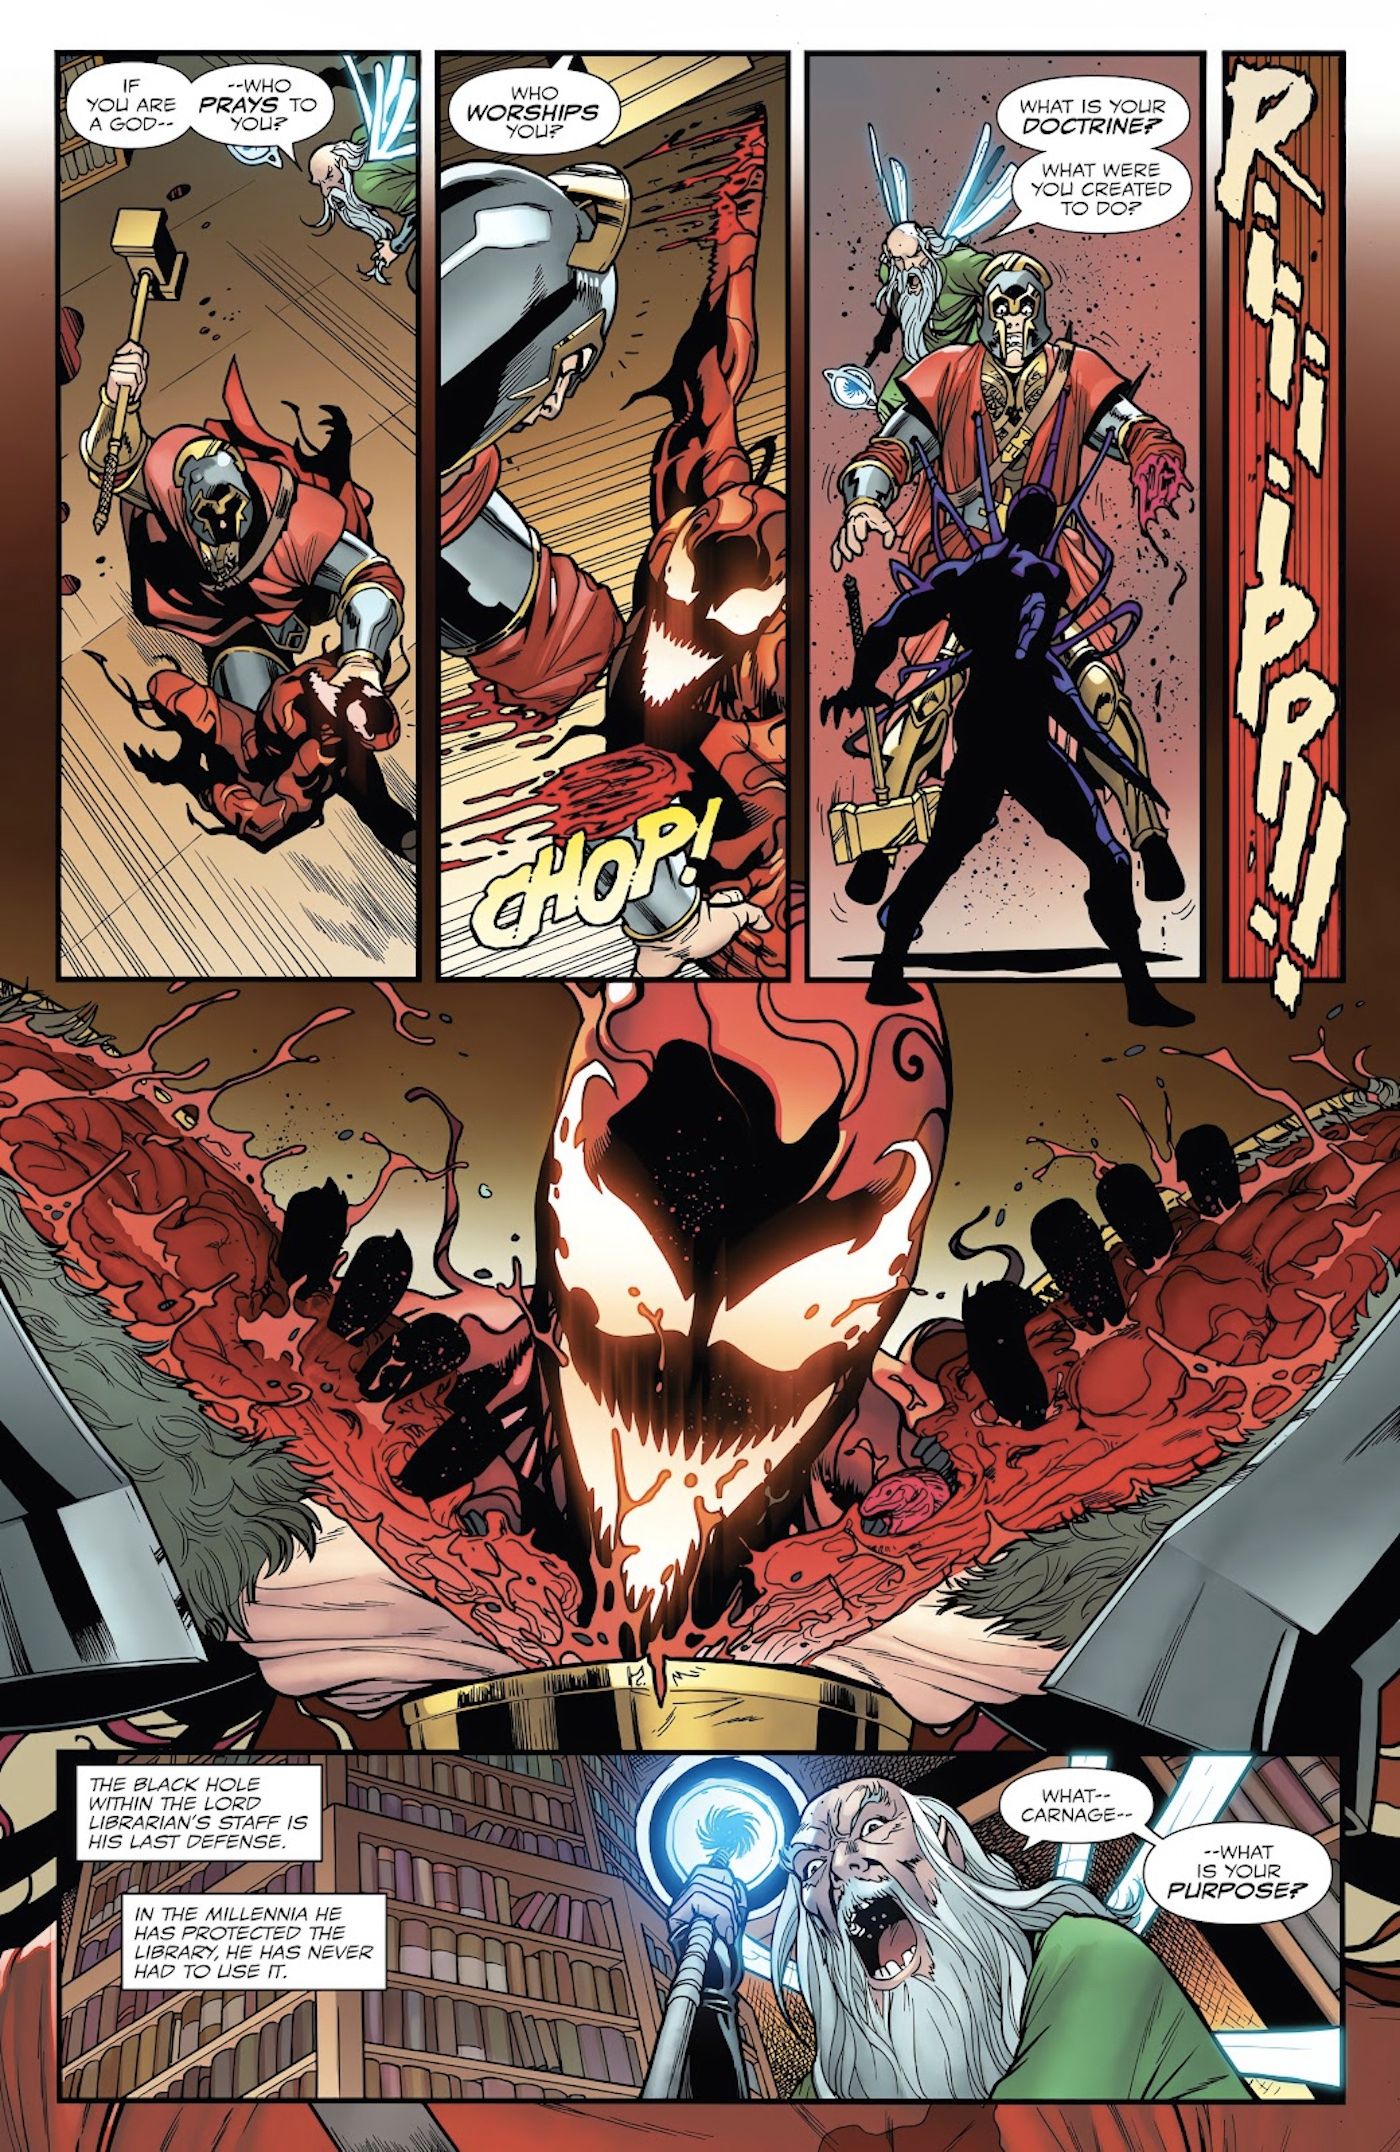 Carnage Is Becoming A True Marvel God (And He’s Closer Than You Think)